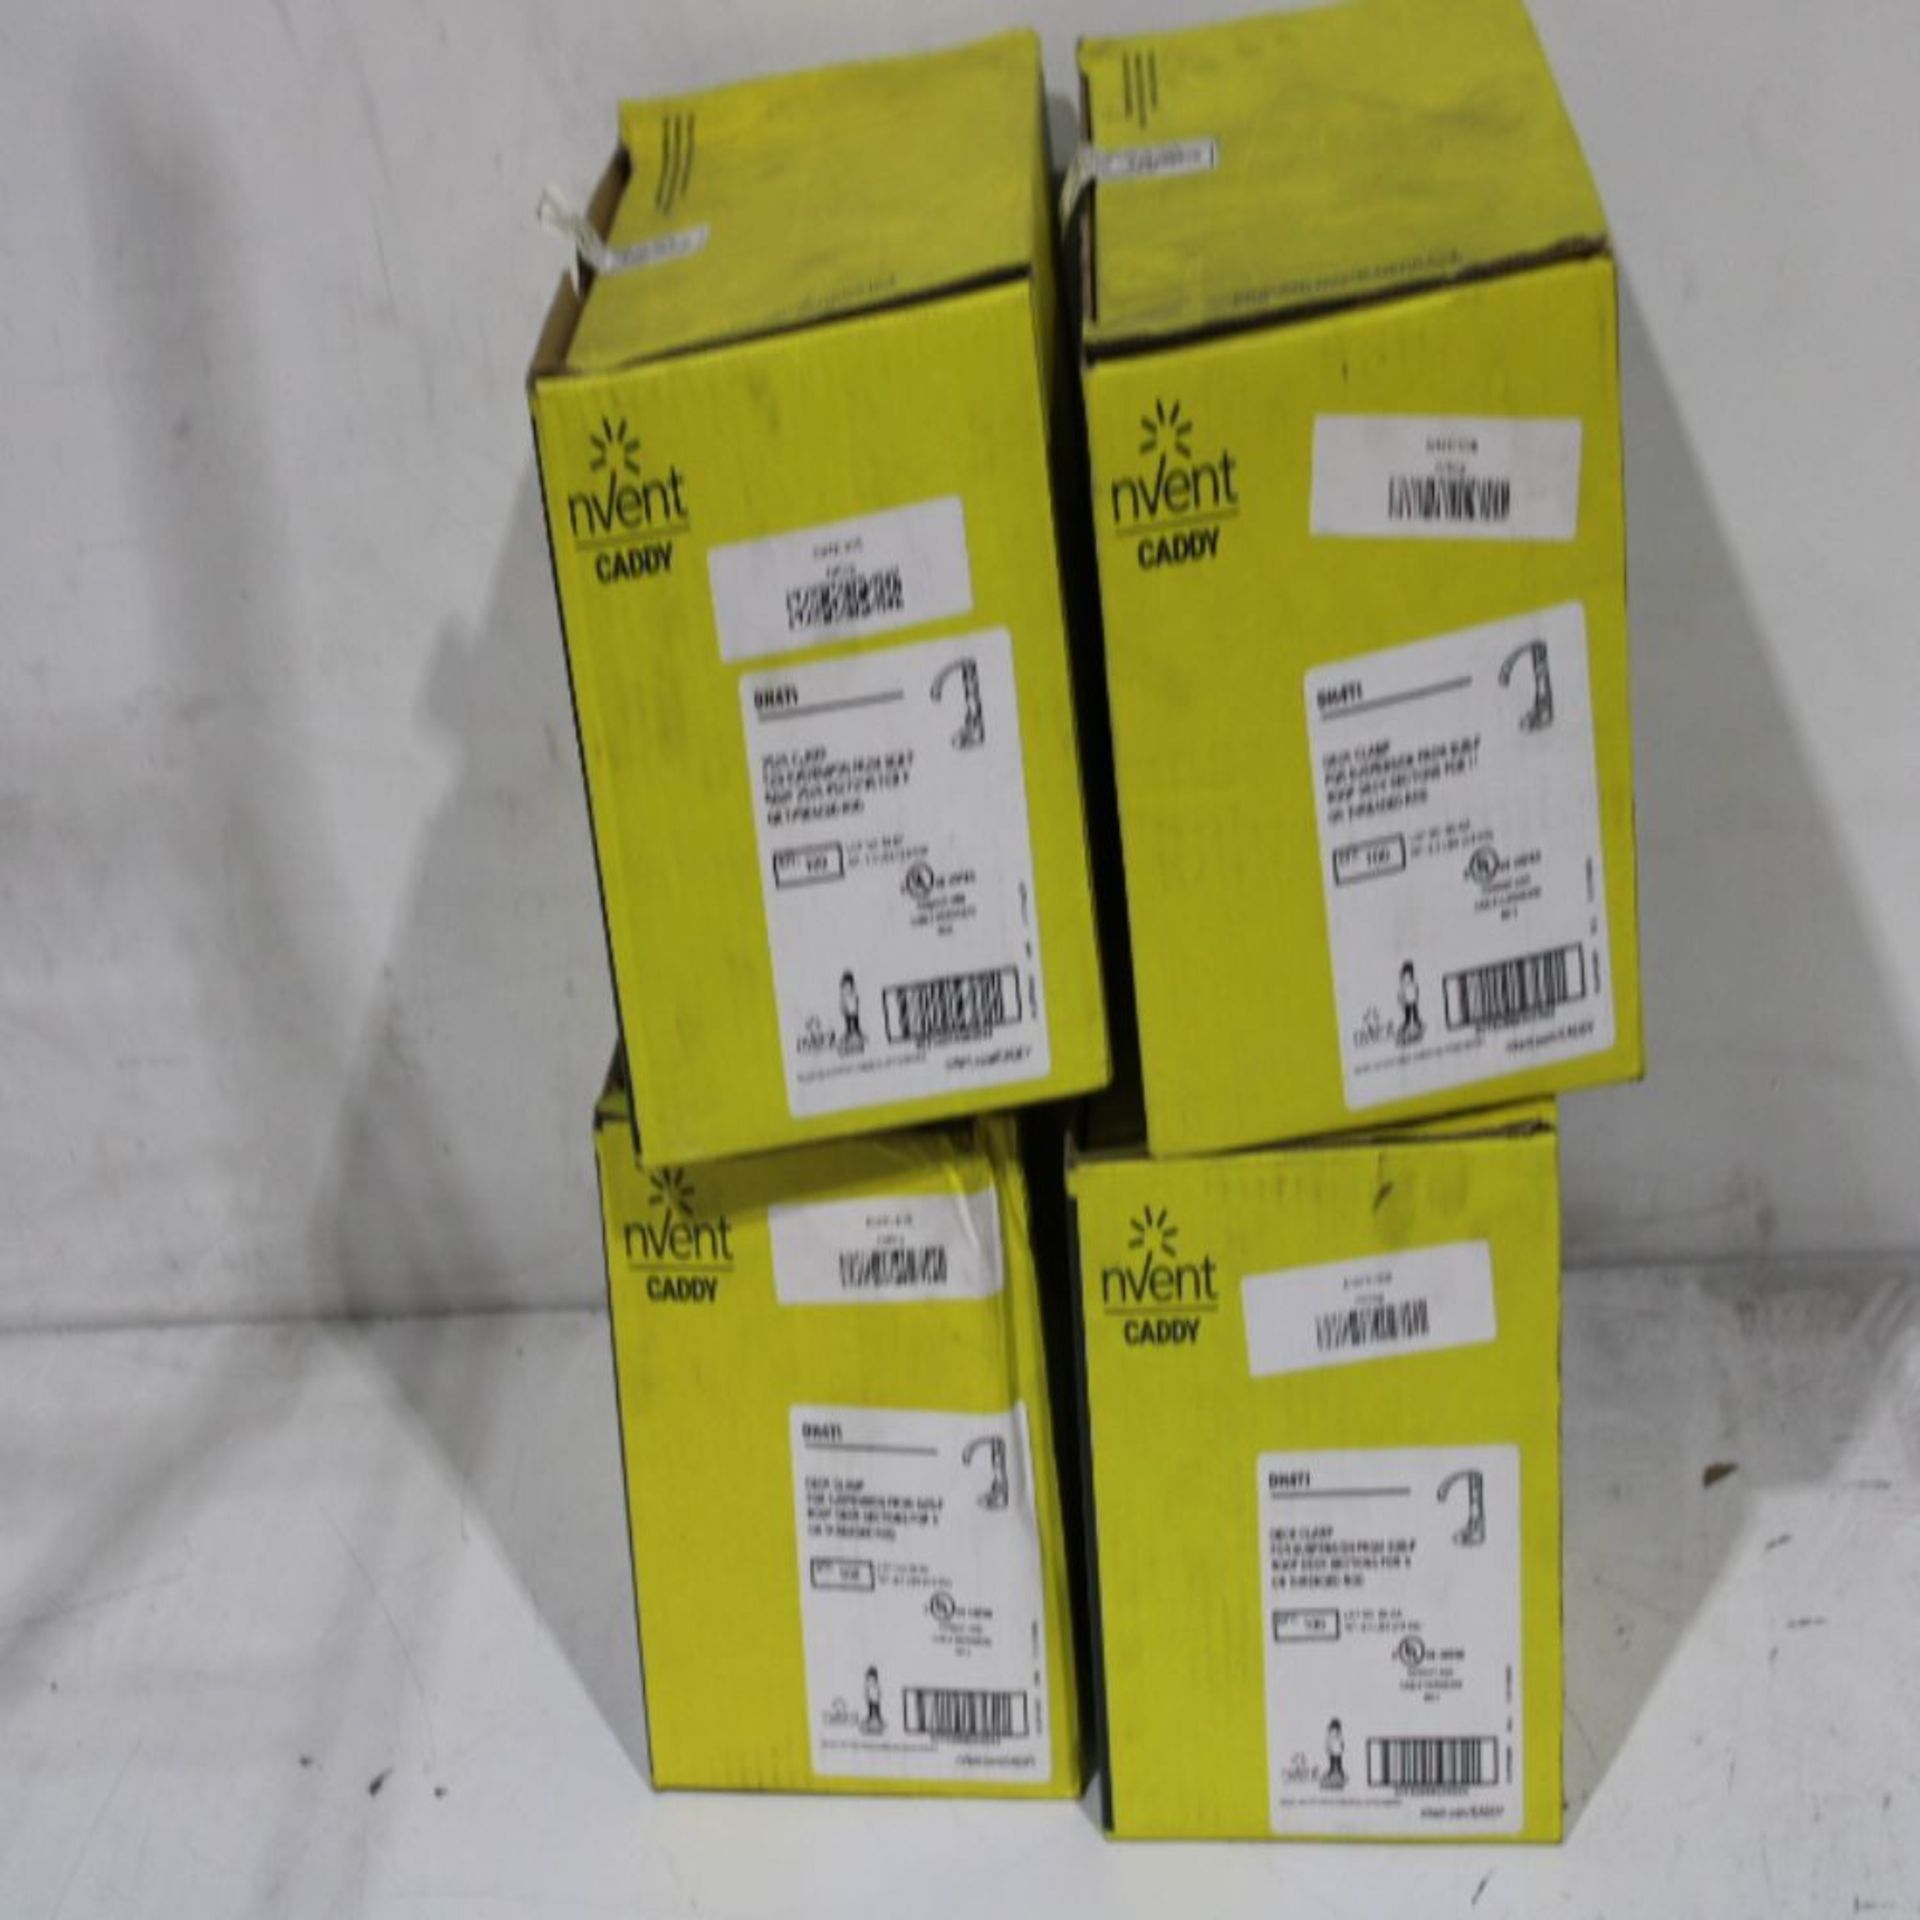 4x Erico DH4TI Conduit Clips/Clamps/Hangers Deck Clamp 100BOX - Image 2 of 6